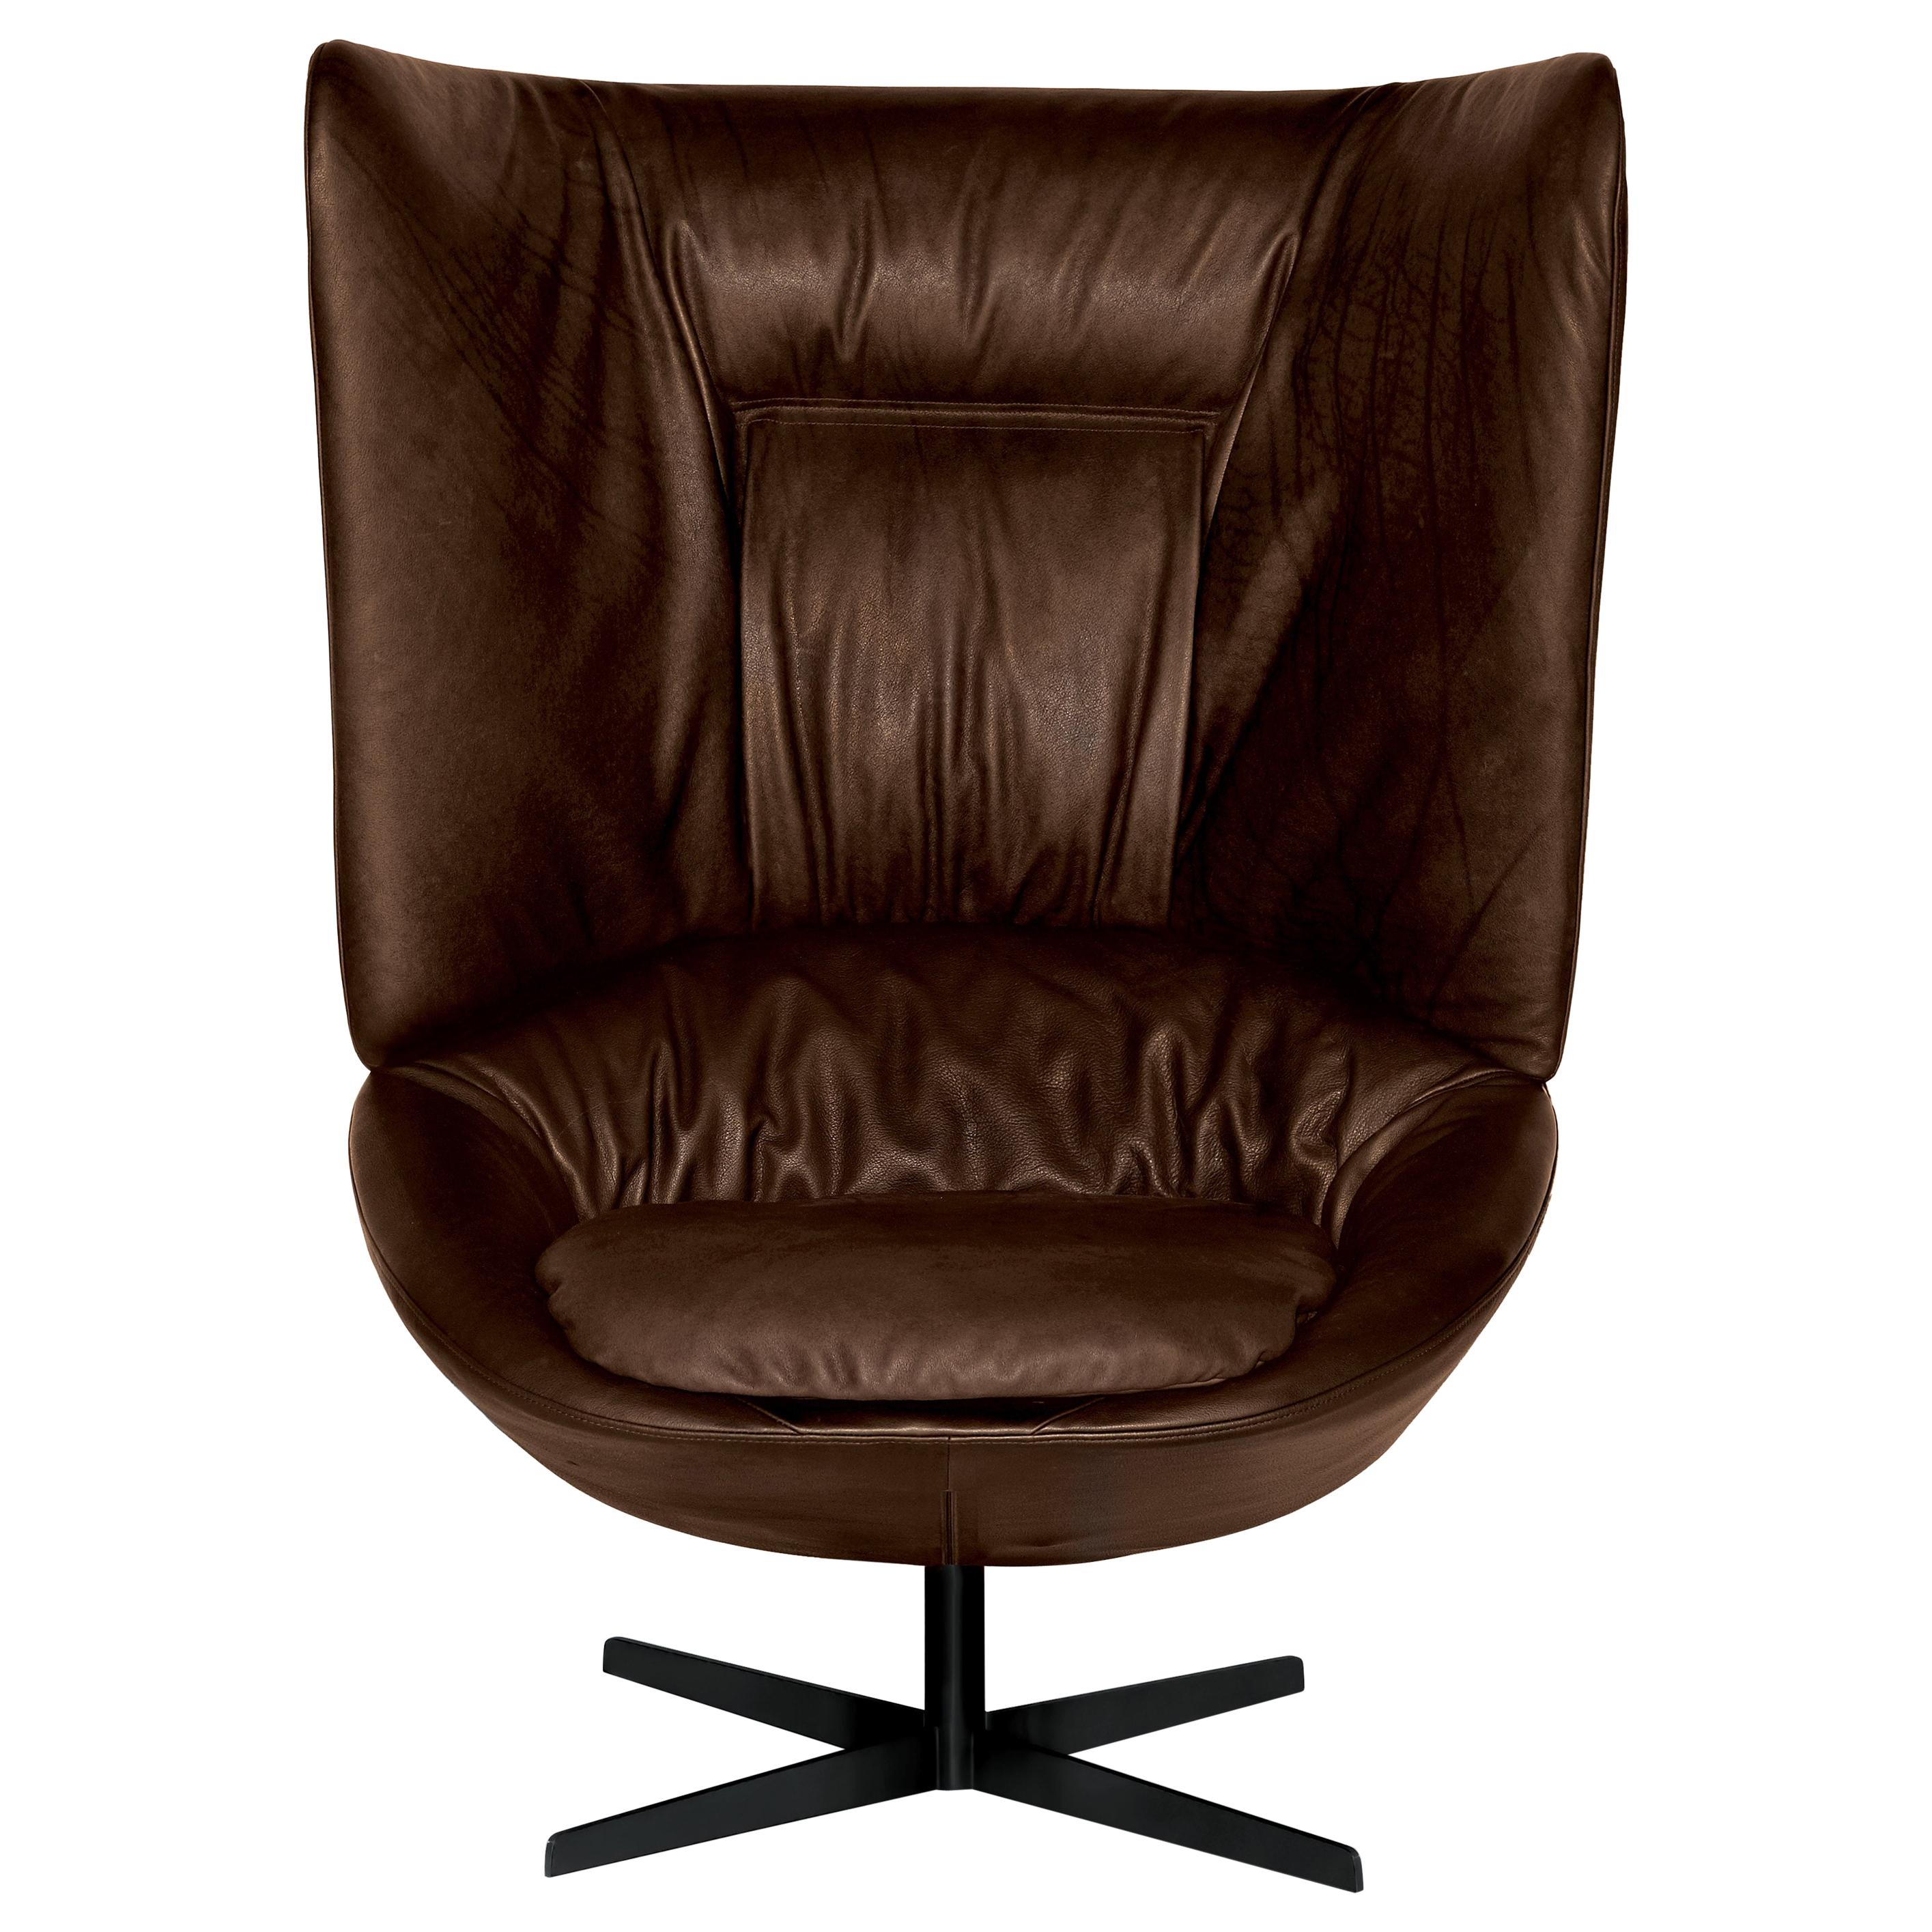 Arflex Ladle Armchair with High Backrest in Giada Leather by Luca Nichetto For Sale